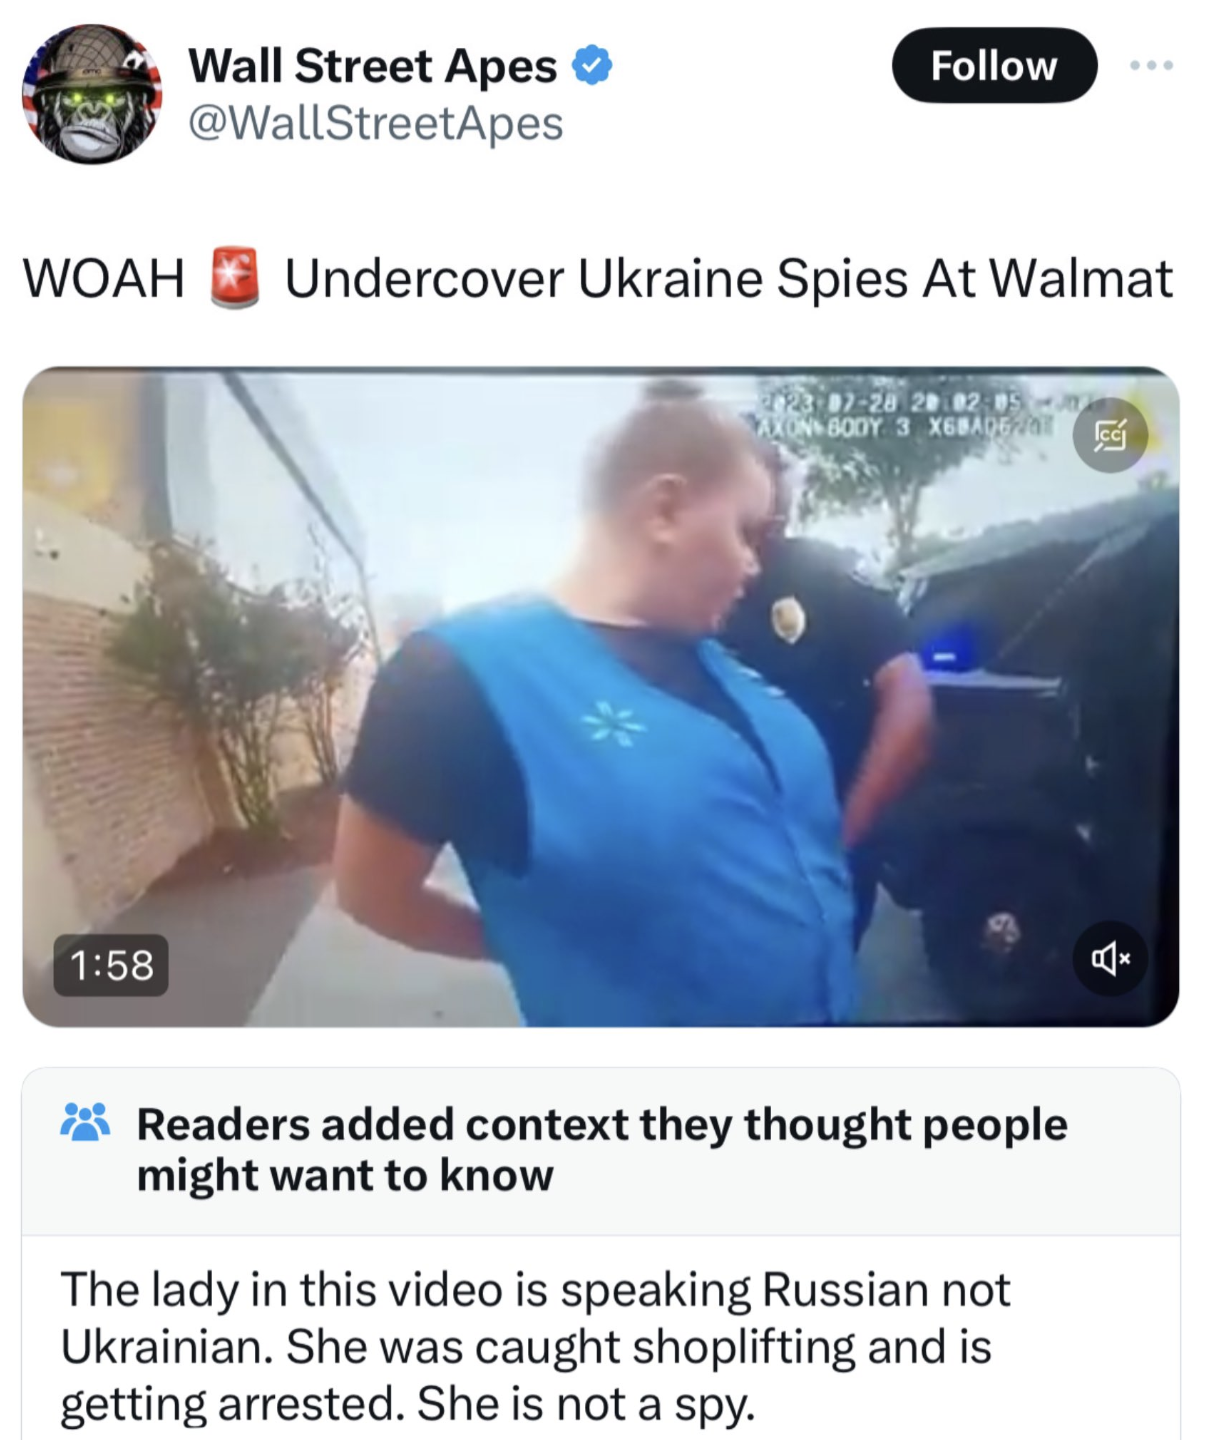 screenshot - Woah Wall Street Apes Undercover Ukraine Spies At Walmat Readers added context they thought people might want to know The lady in this video is speaking Russian not Ukrainian. She was caught shoplifting and is getting arrested. She is not a s